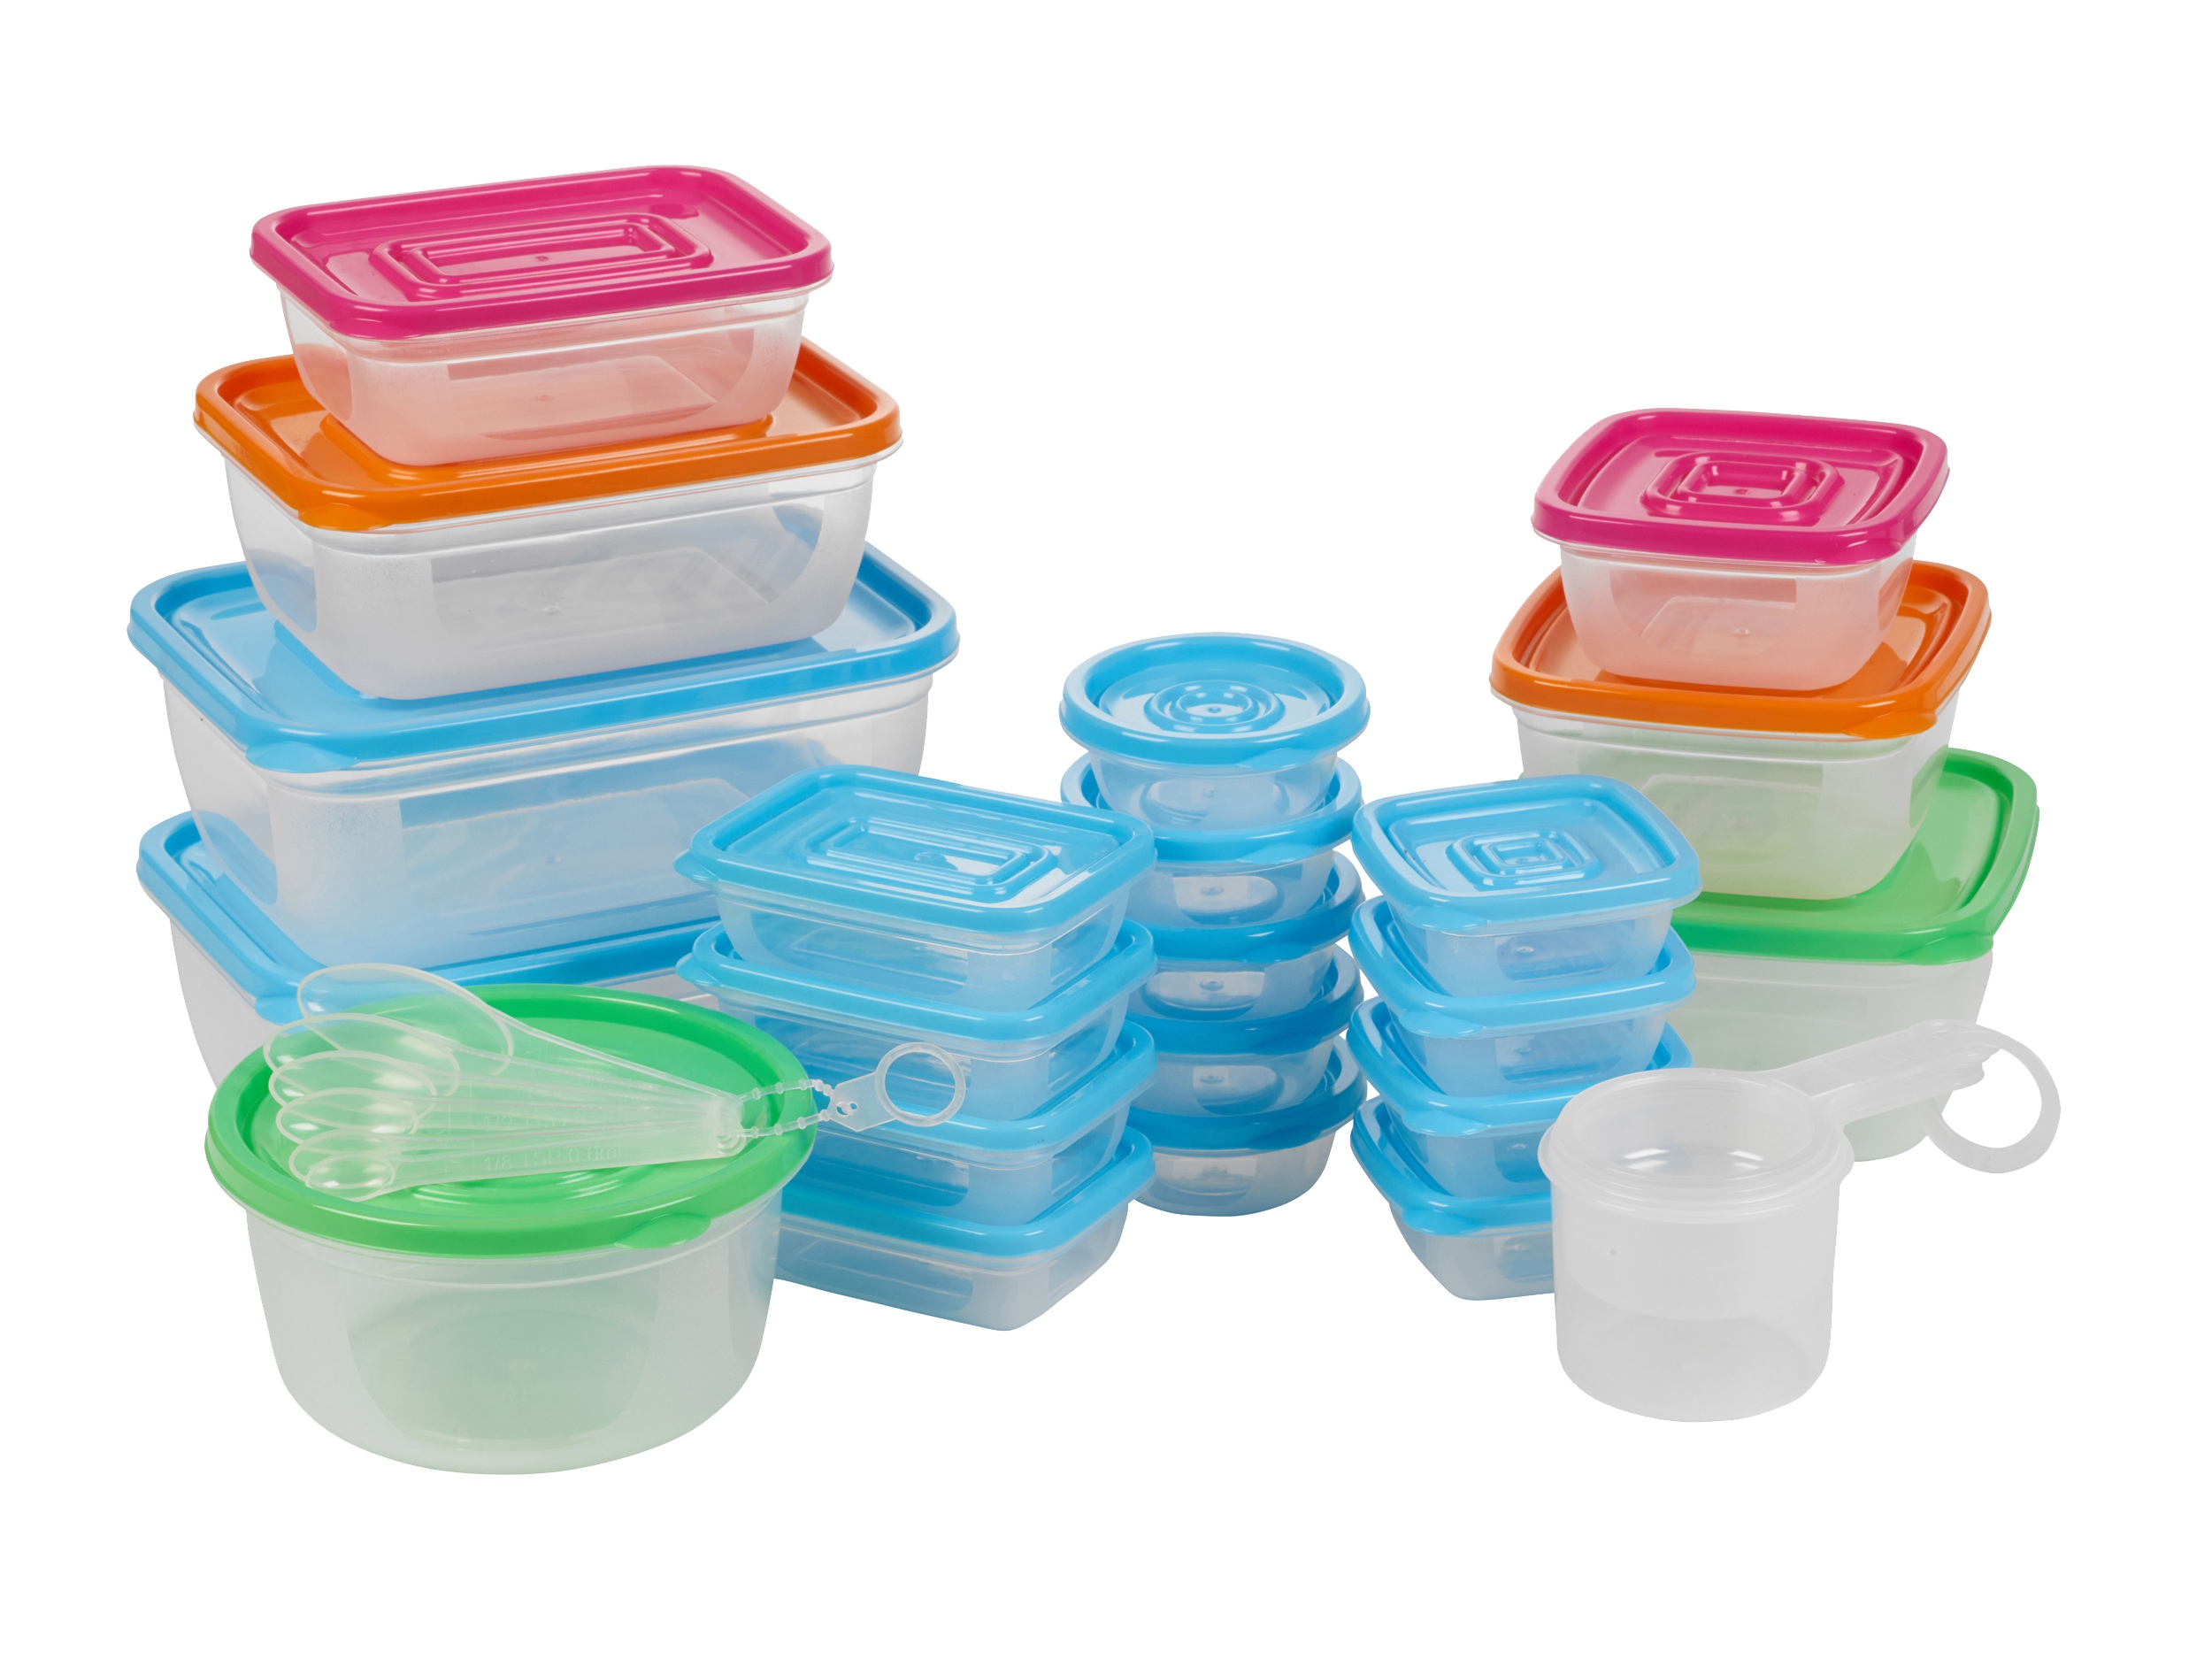 Immagini relative a food storage containers